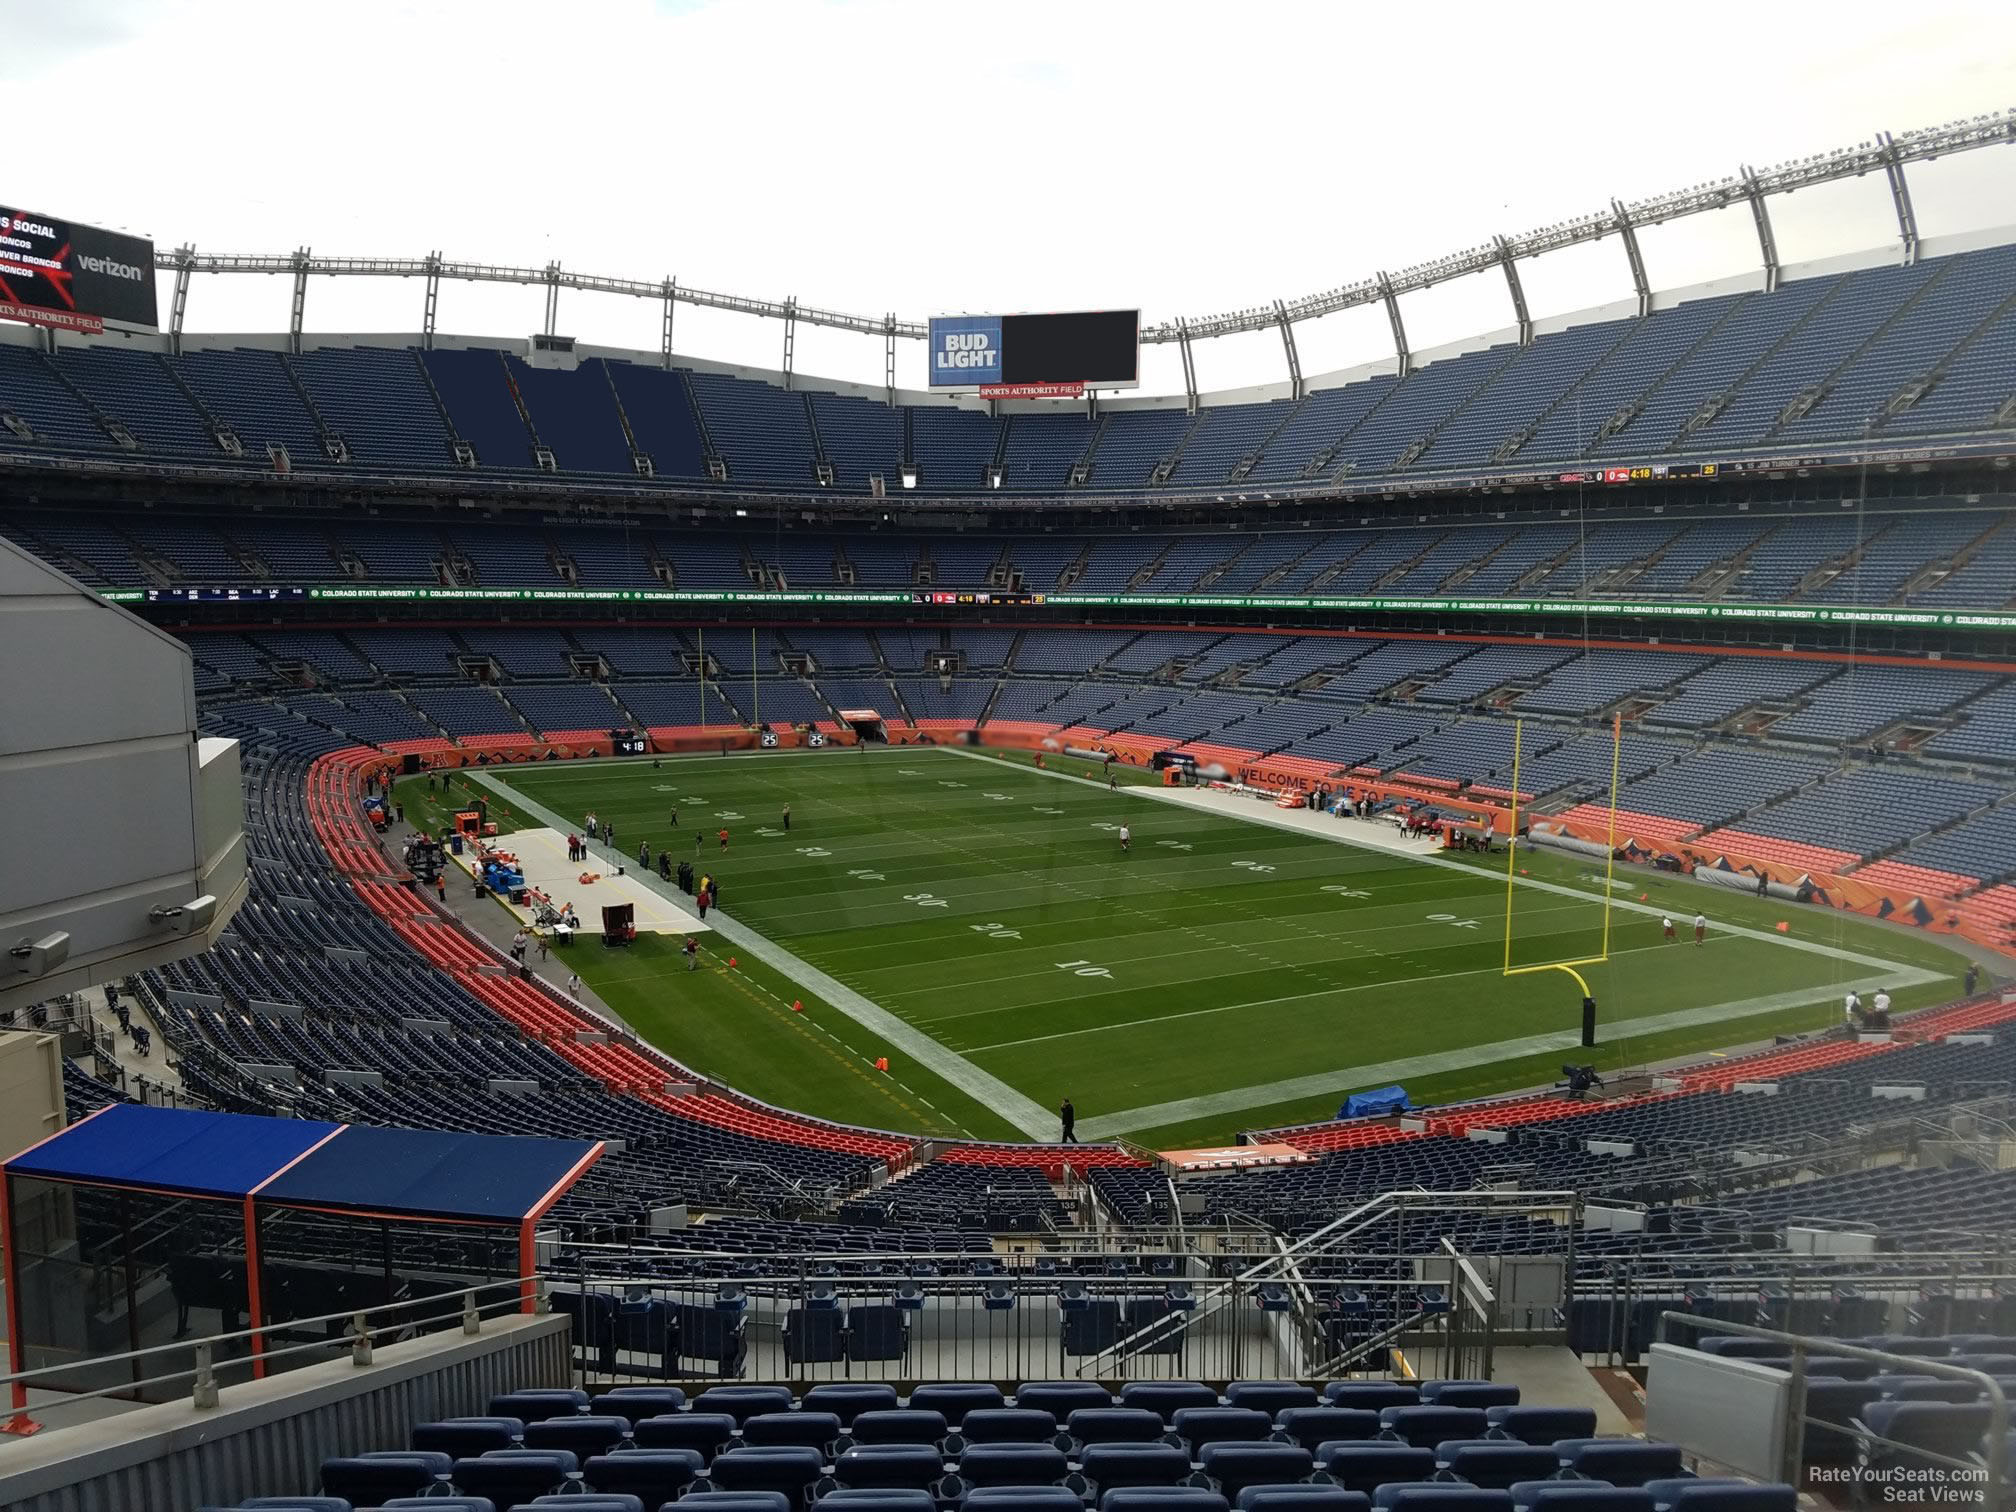 section 236, row 16 seat view  - empower field (at mile high)